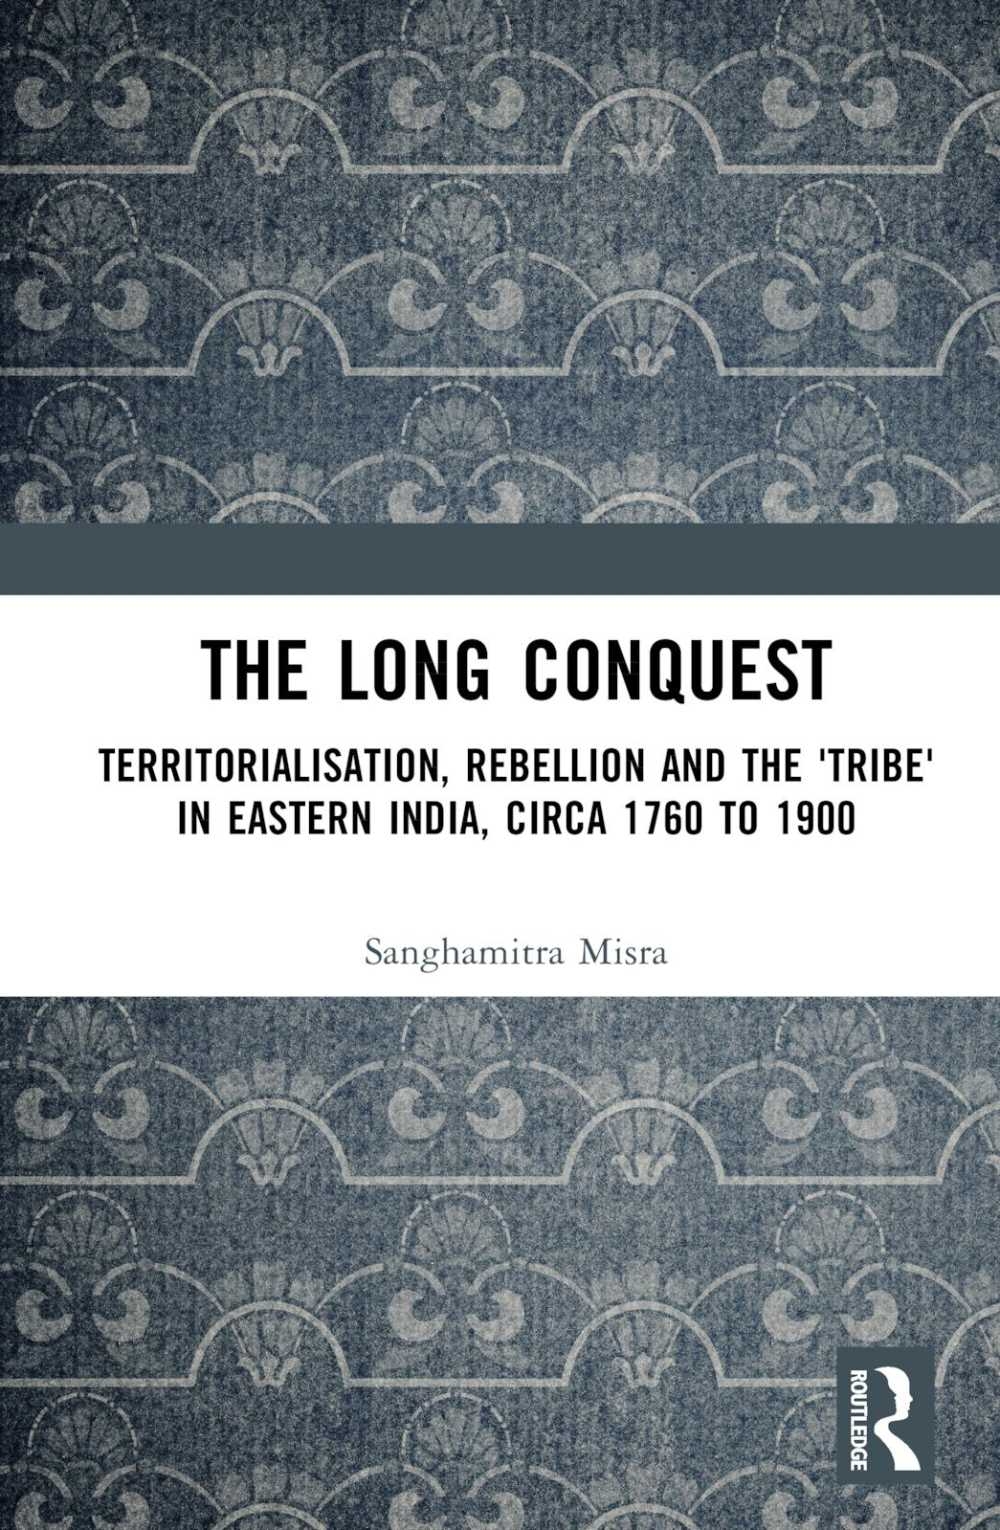 The Long Conquest: Territorialisation, Rebellion and the ’Tribe’ in Eastern India, Circa 1760 to 1900